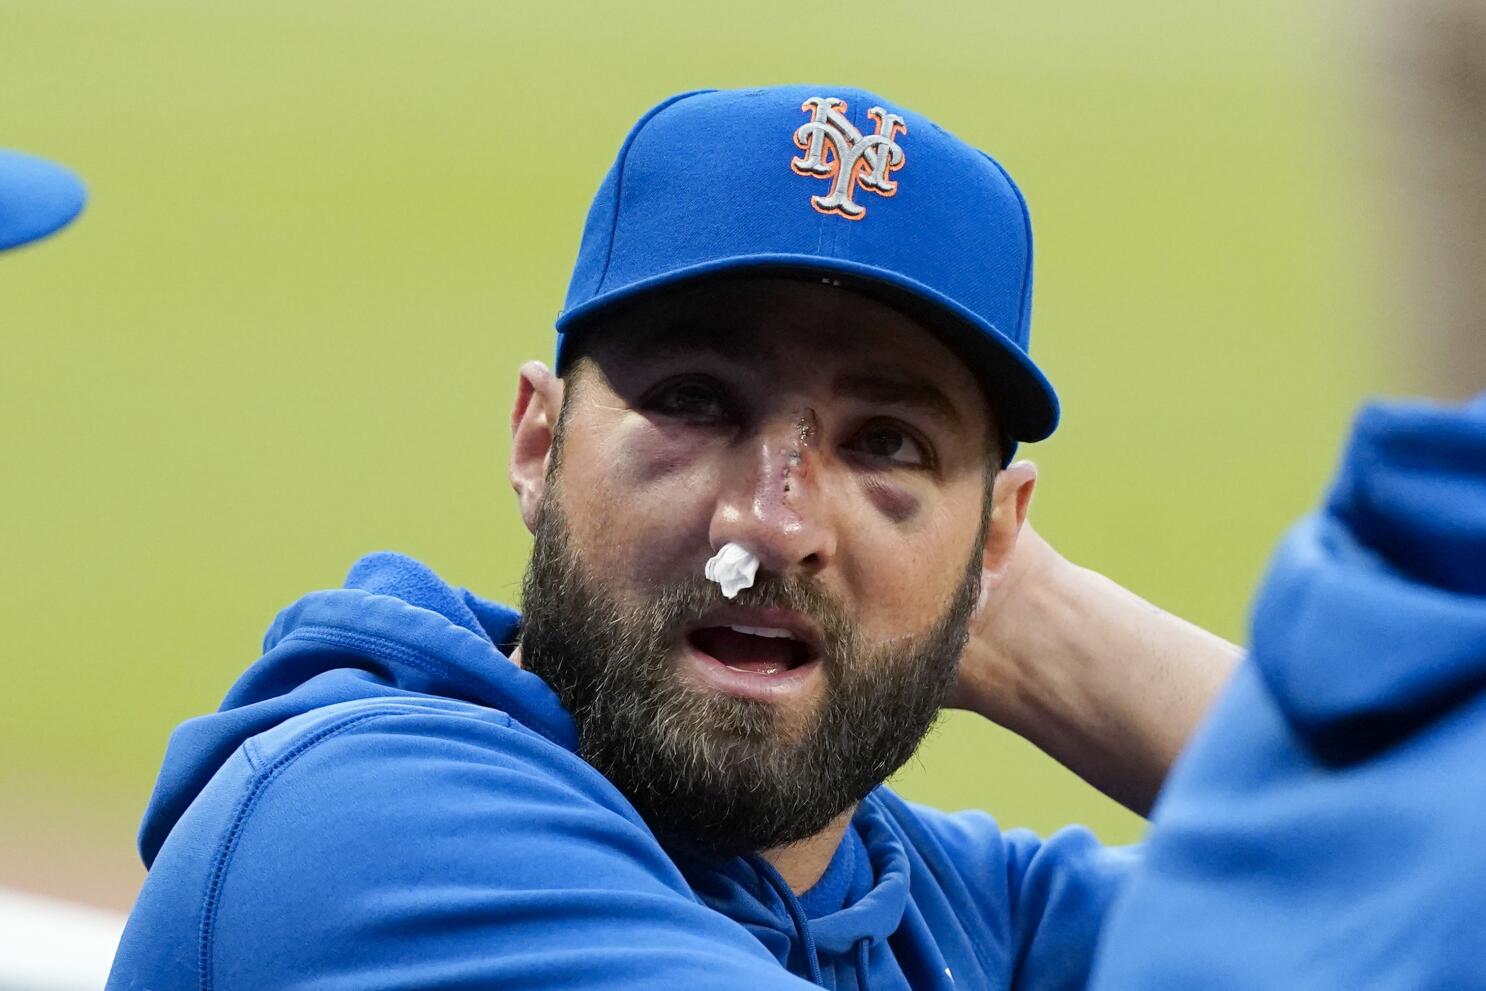 Kevin Pillar on injured list after HBP to face